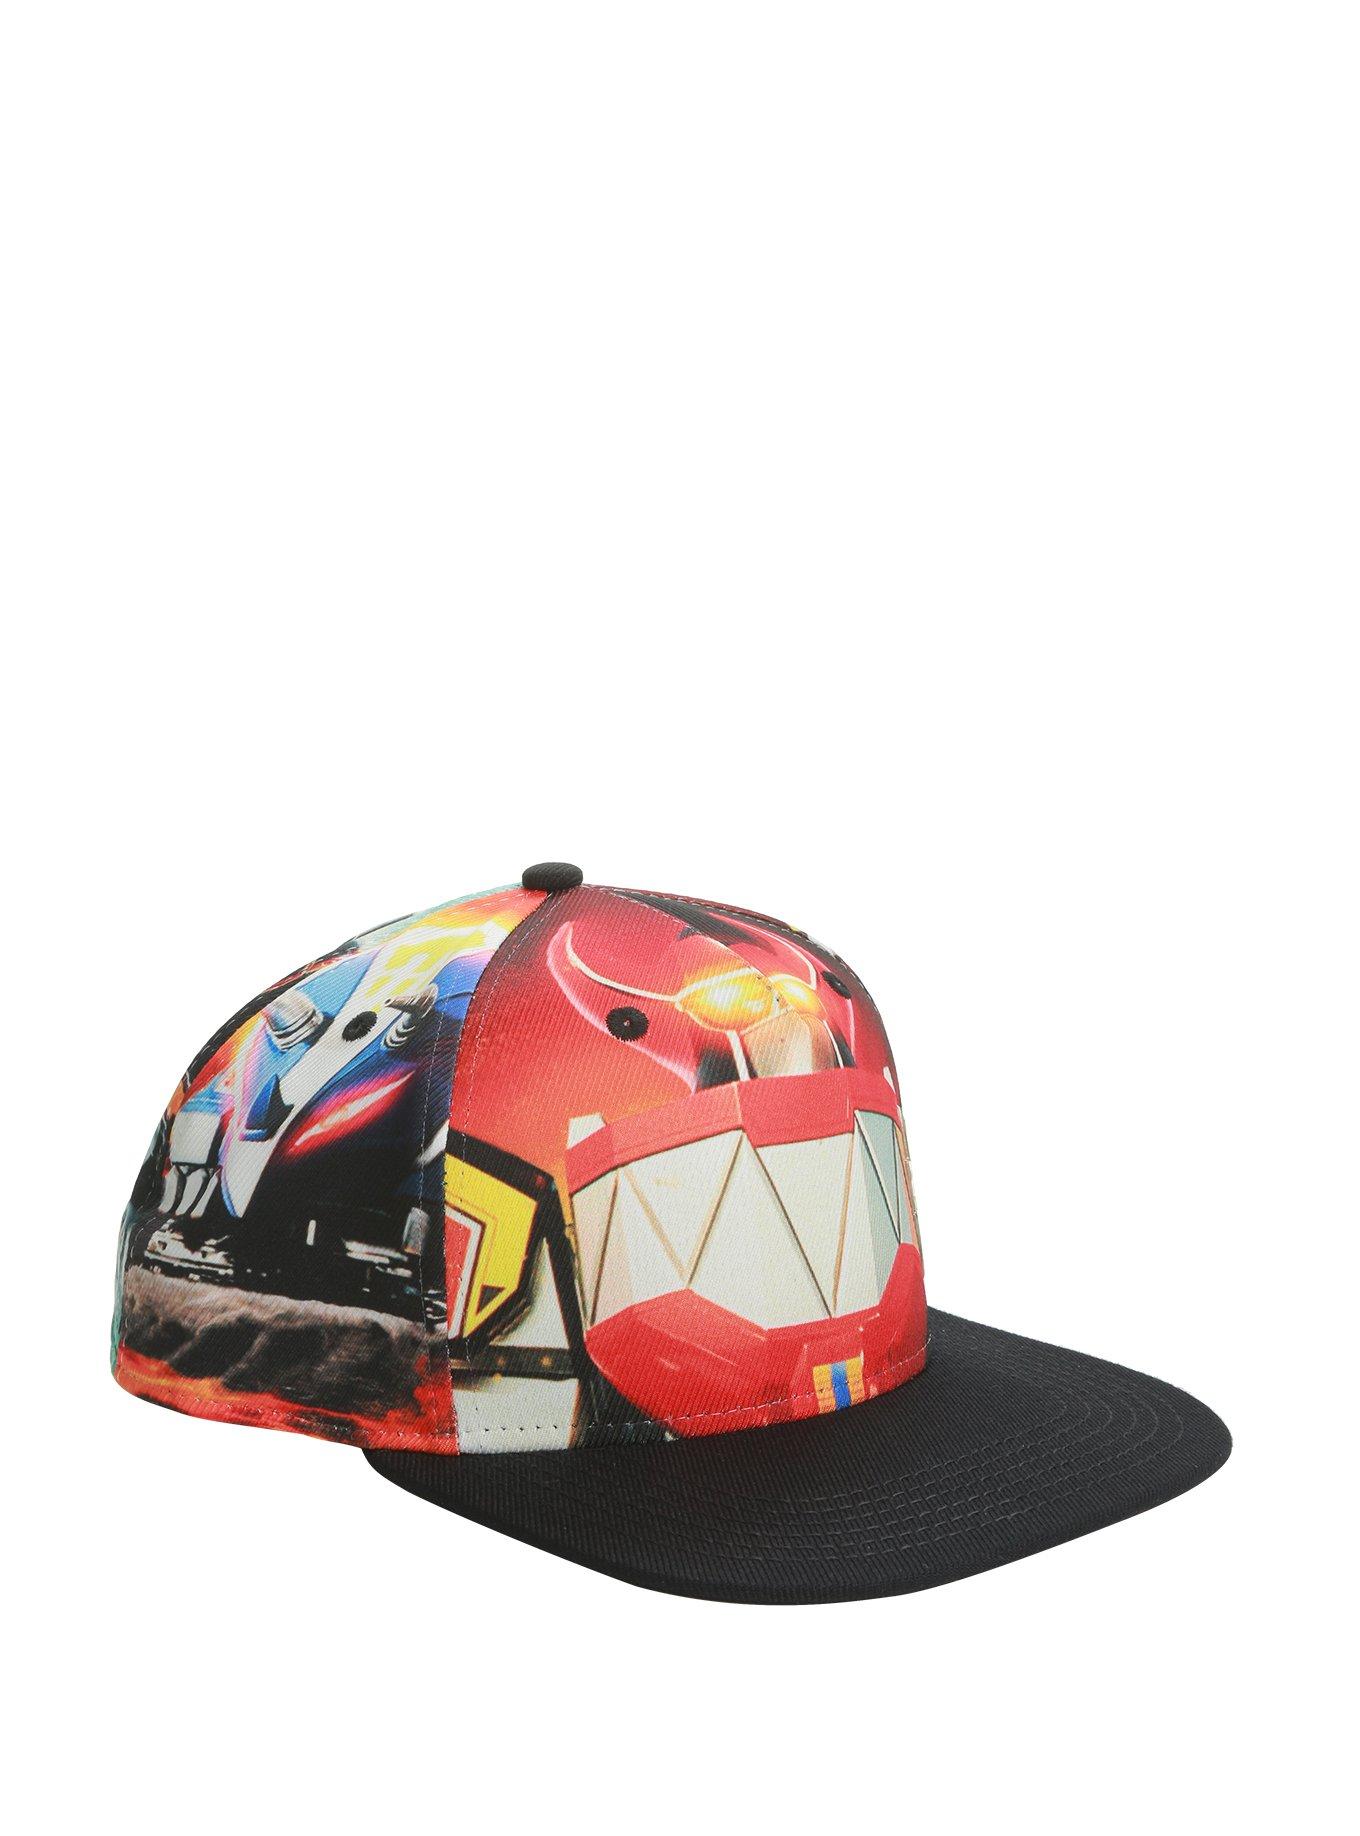 Mighty Morphin Power Rangers Allover Sublimation Snapback Hat, , hi-res